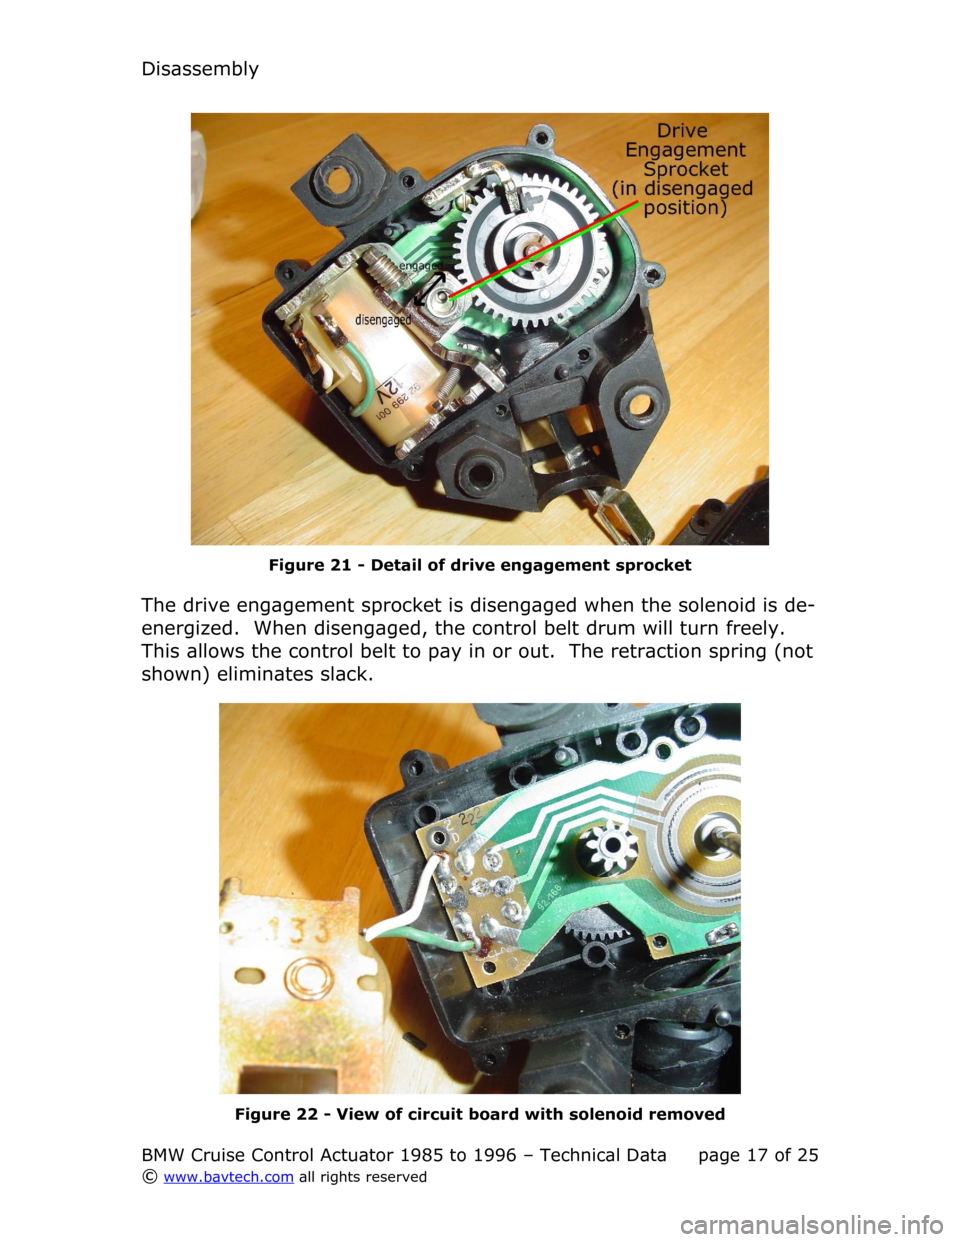 BMW 7 SERIES 1988 E32 Cruise Control Acutator Disassembly
Figure  21  - Detail of drive engagement sprocket
The drive engagement sprocket is disengaged when the solenoid is de-
energized.  When disengaged, the control belt drum will turn freely. 